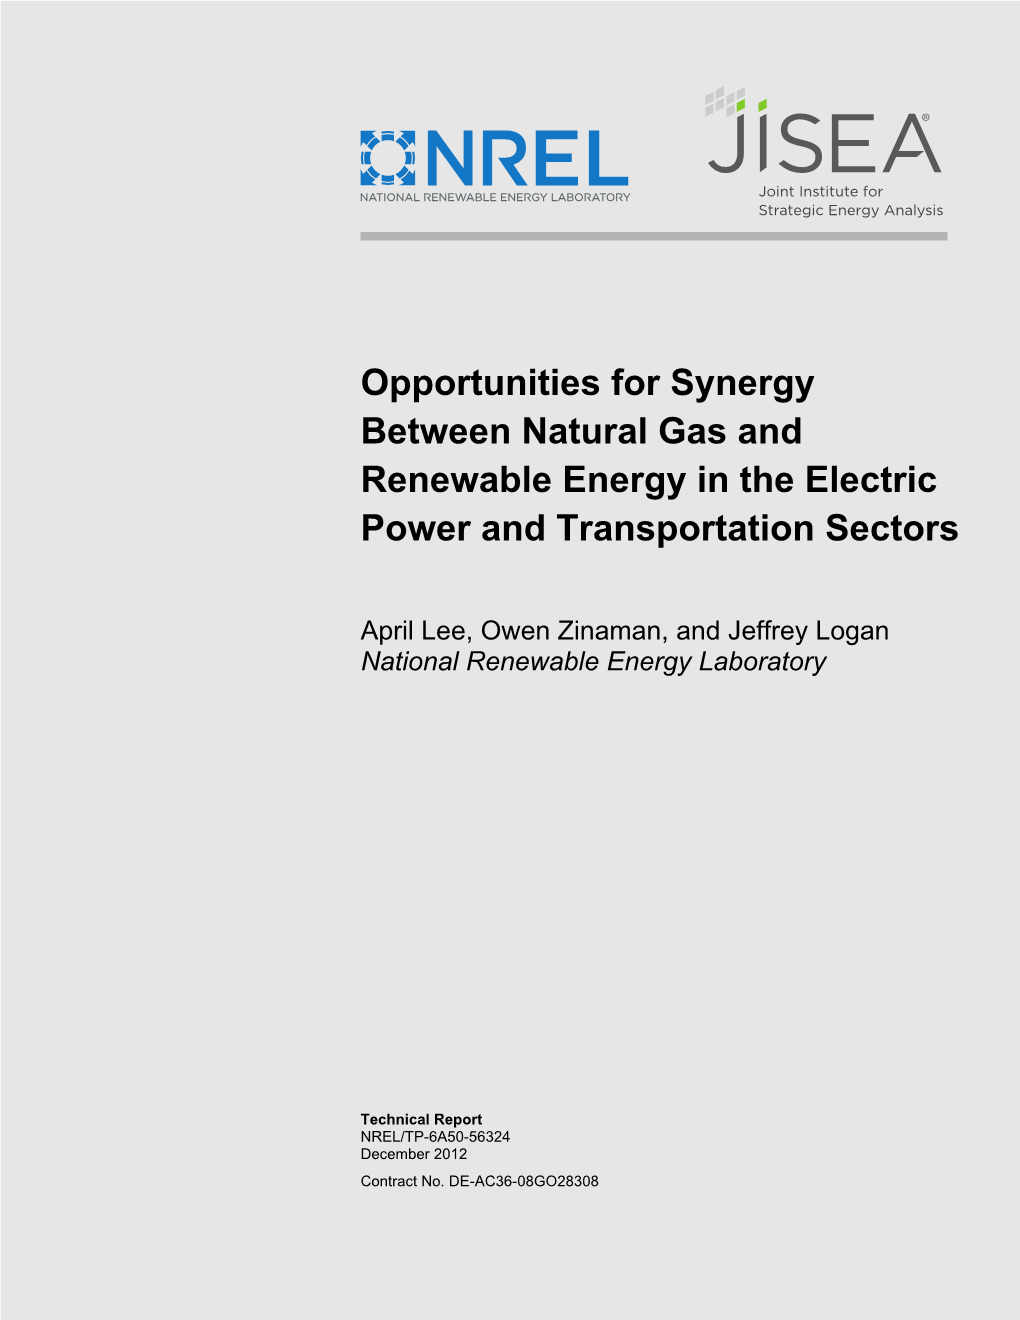 Opportunities for Synergy Between Natural Gas and Renewable Energy in the Electric Power and Transportation Sectors